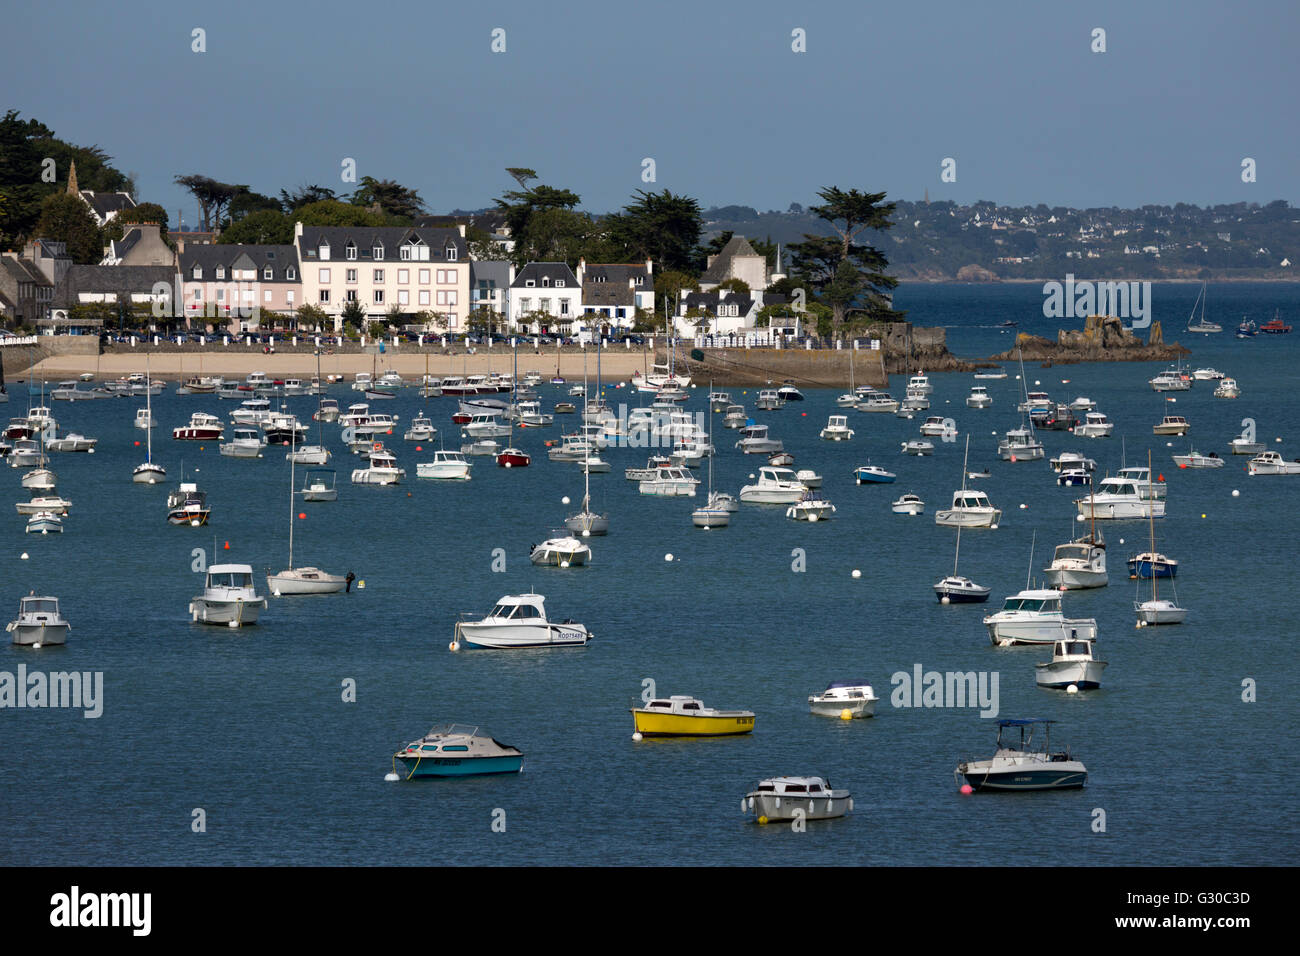 View over seaside village and boats in bay, Locquirec, Finistere, Brittany, France, Europe Stock Photo